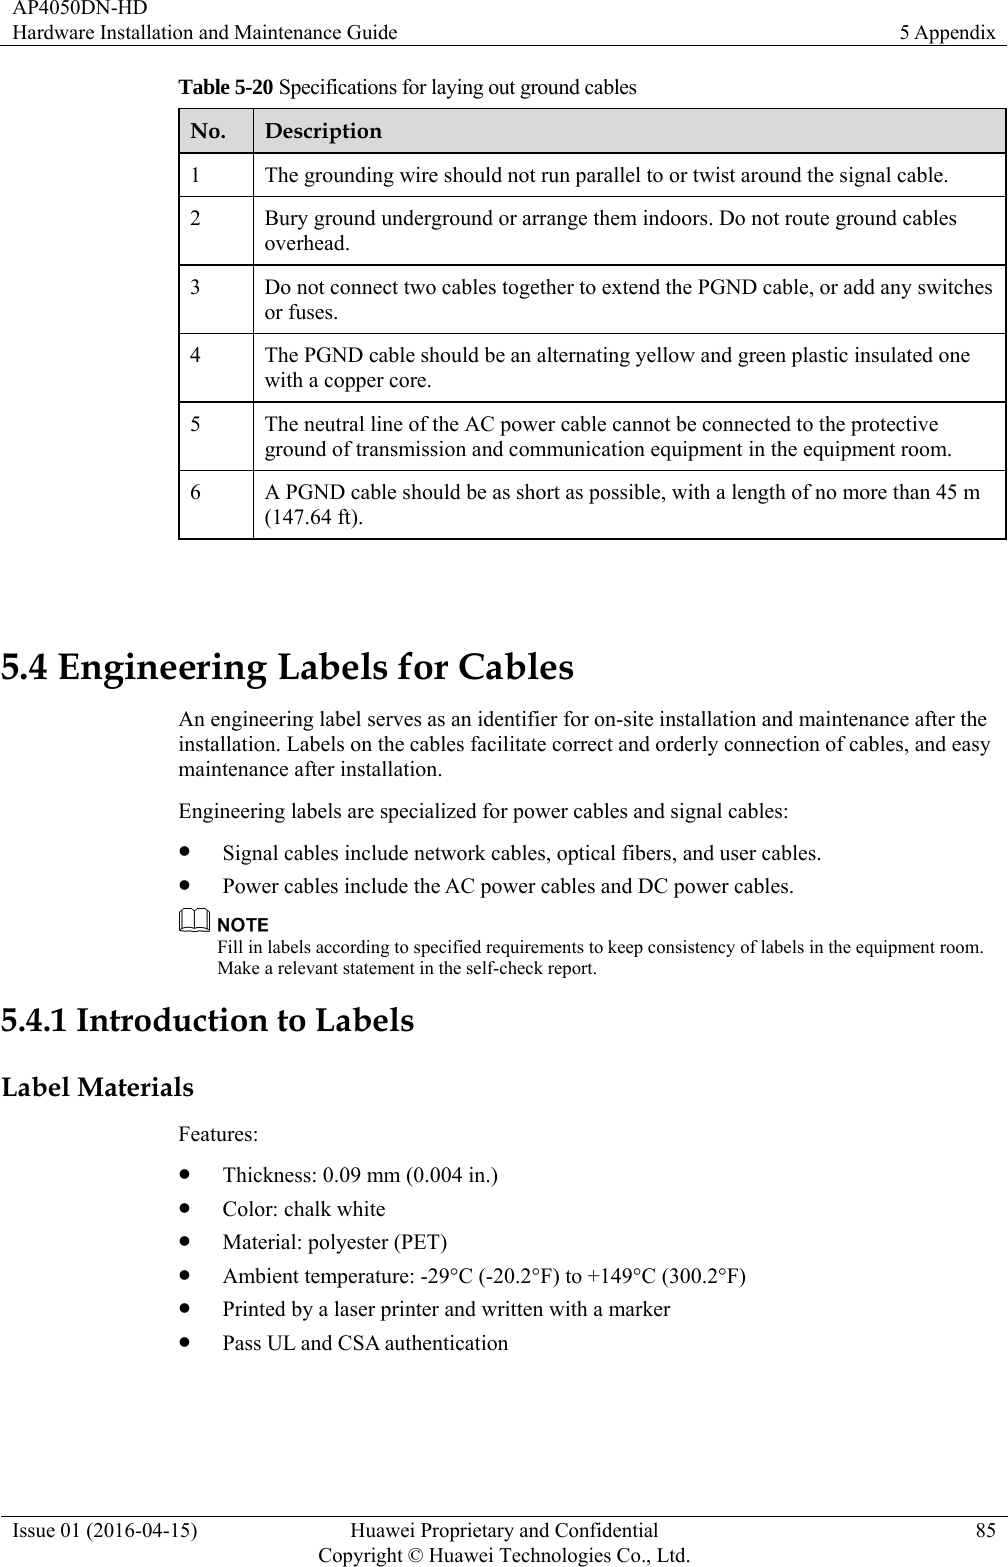 AP4050DN-HD Hardware Installation and Maintenance Guide  5 Appendix Issue 01 (2016-04-15)  Huawei Proprietary and Confidential         Copyright © Huawei Technologies Co., Ltd.85 Table 5-20 Specifications for laying out ground cables No.  Description 1  The grounding wire should not run parallel to or twist around the signal cable. 2  Bury ground underground or arrange them indoors. Do not route ground cables overhead. 3  Do not connect two cables together to extend the PGND cable, or add any switches or fuses. 4  The PGND cable should be an alternating yellow and green plastic insulated one with a copper core. 5  The neutral line of the AC power cable cannot be connected to the protective ground of transmission and communication equipment in the equipment room. 6  A PGND cable should be as short as possible, with a length of no more than 45 m (147.64 ft).  5.4 Engineering Labels for Cables An engineering label serves as an identifier for on-site installation and maintenance after the installation. Labels on the cables facilitate correct and orderly connection of cables, and easy maintenance after installation. Engineering labels are specialized for power cables and signal cables:  Signal cables include network cables, optical fibers, and user cables.  Power cables include the AC power cables and DC power cables.  Fill in labels according to specified requirements to keep consistency of labels in the equipment room. Make a relevant statement in the self-check report. 5.4.1 Introduction to Labels Label Materials Features:  Thickness: 0.09 mm (0.004 in.)  Color: chalk white  Material: polyester (PET)  Ambient temperature: -29°C (-20.2°F) to +149°C (300.2°F)  Printed by a laser printer and written with a marker  Pass UL and CSA authentication 